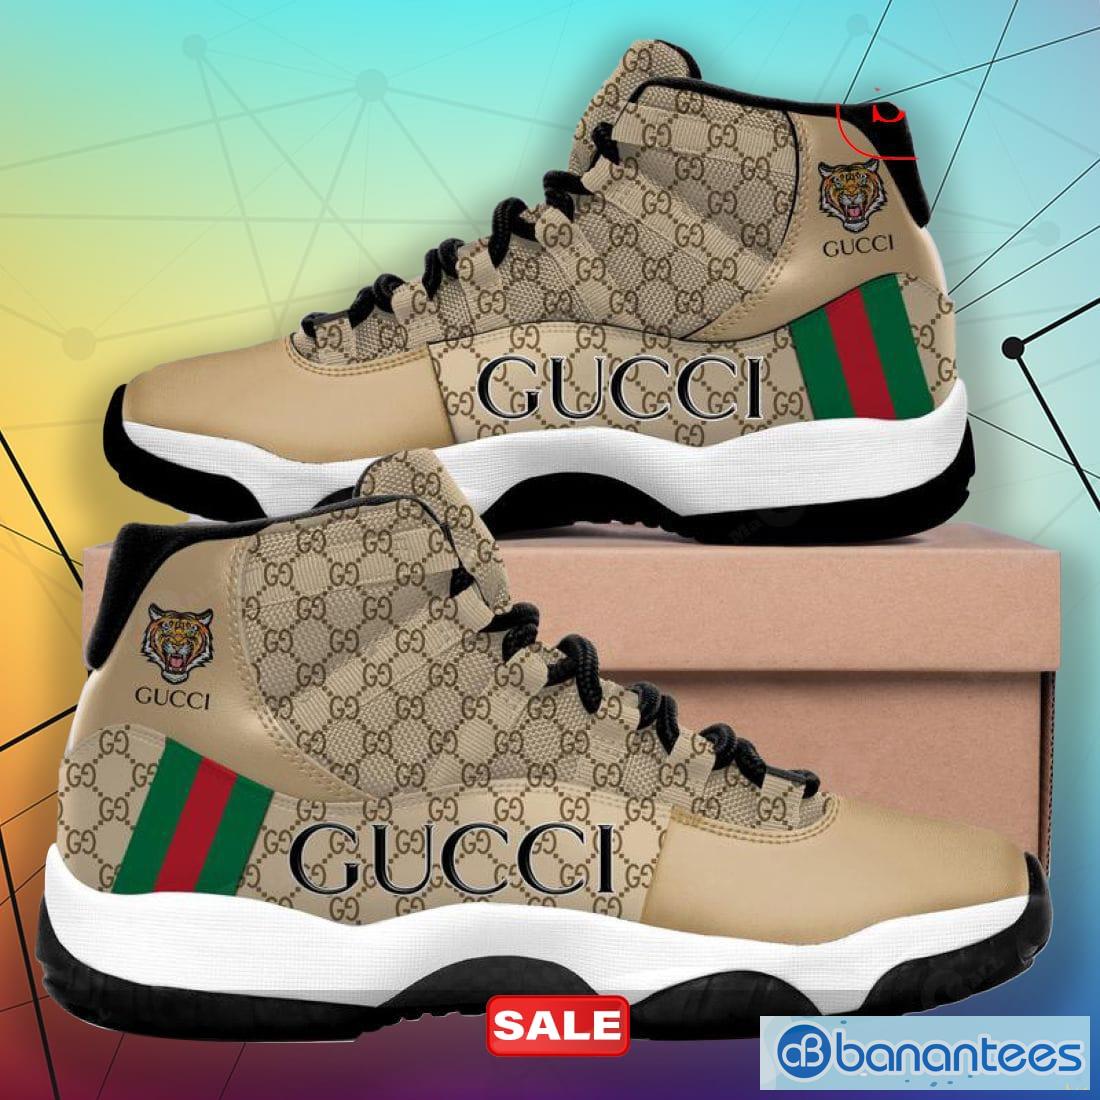 Gucci Brown Tiger 11 Sneakers Gifts For Men Women Shoes Banantees